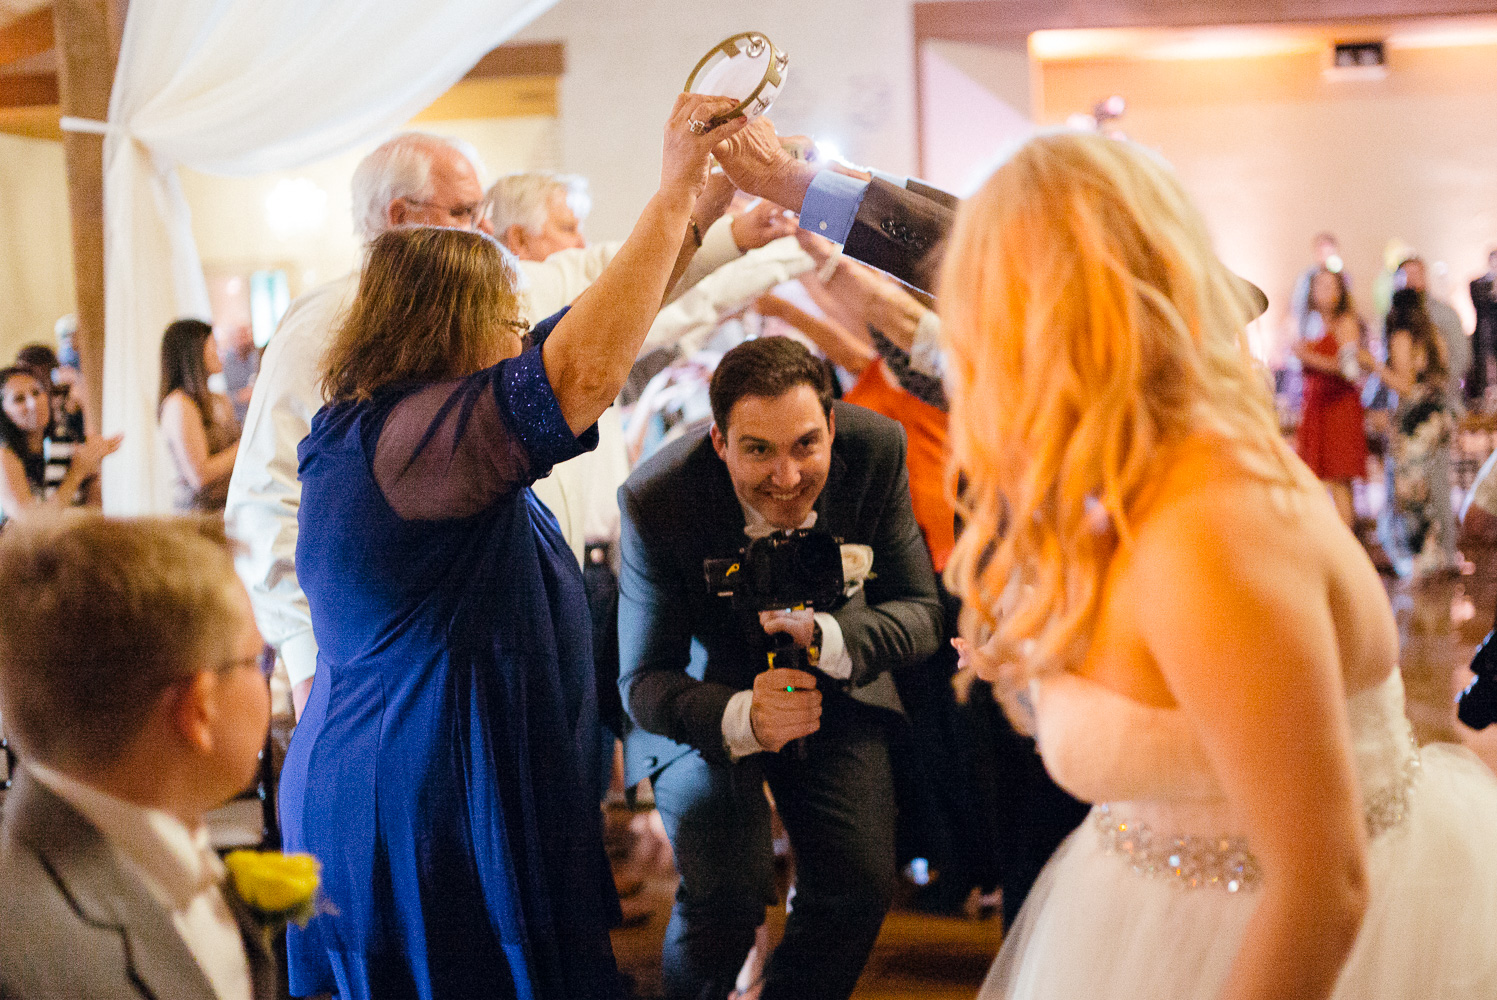 During the Grand March the groom appears holding a videocamera Chandelier of Gruene Wedding Reception-45